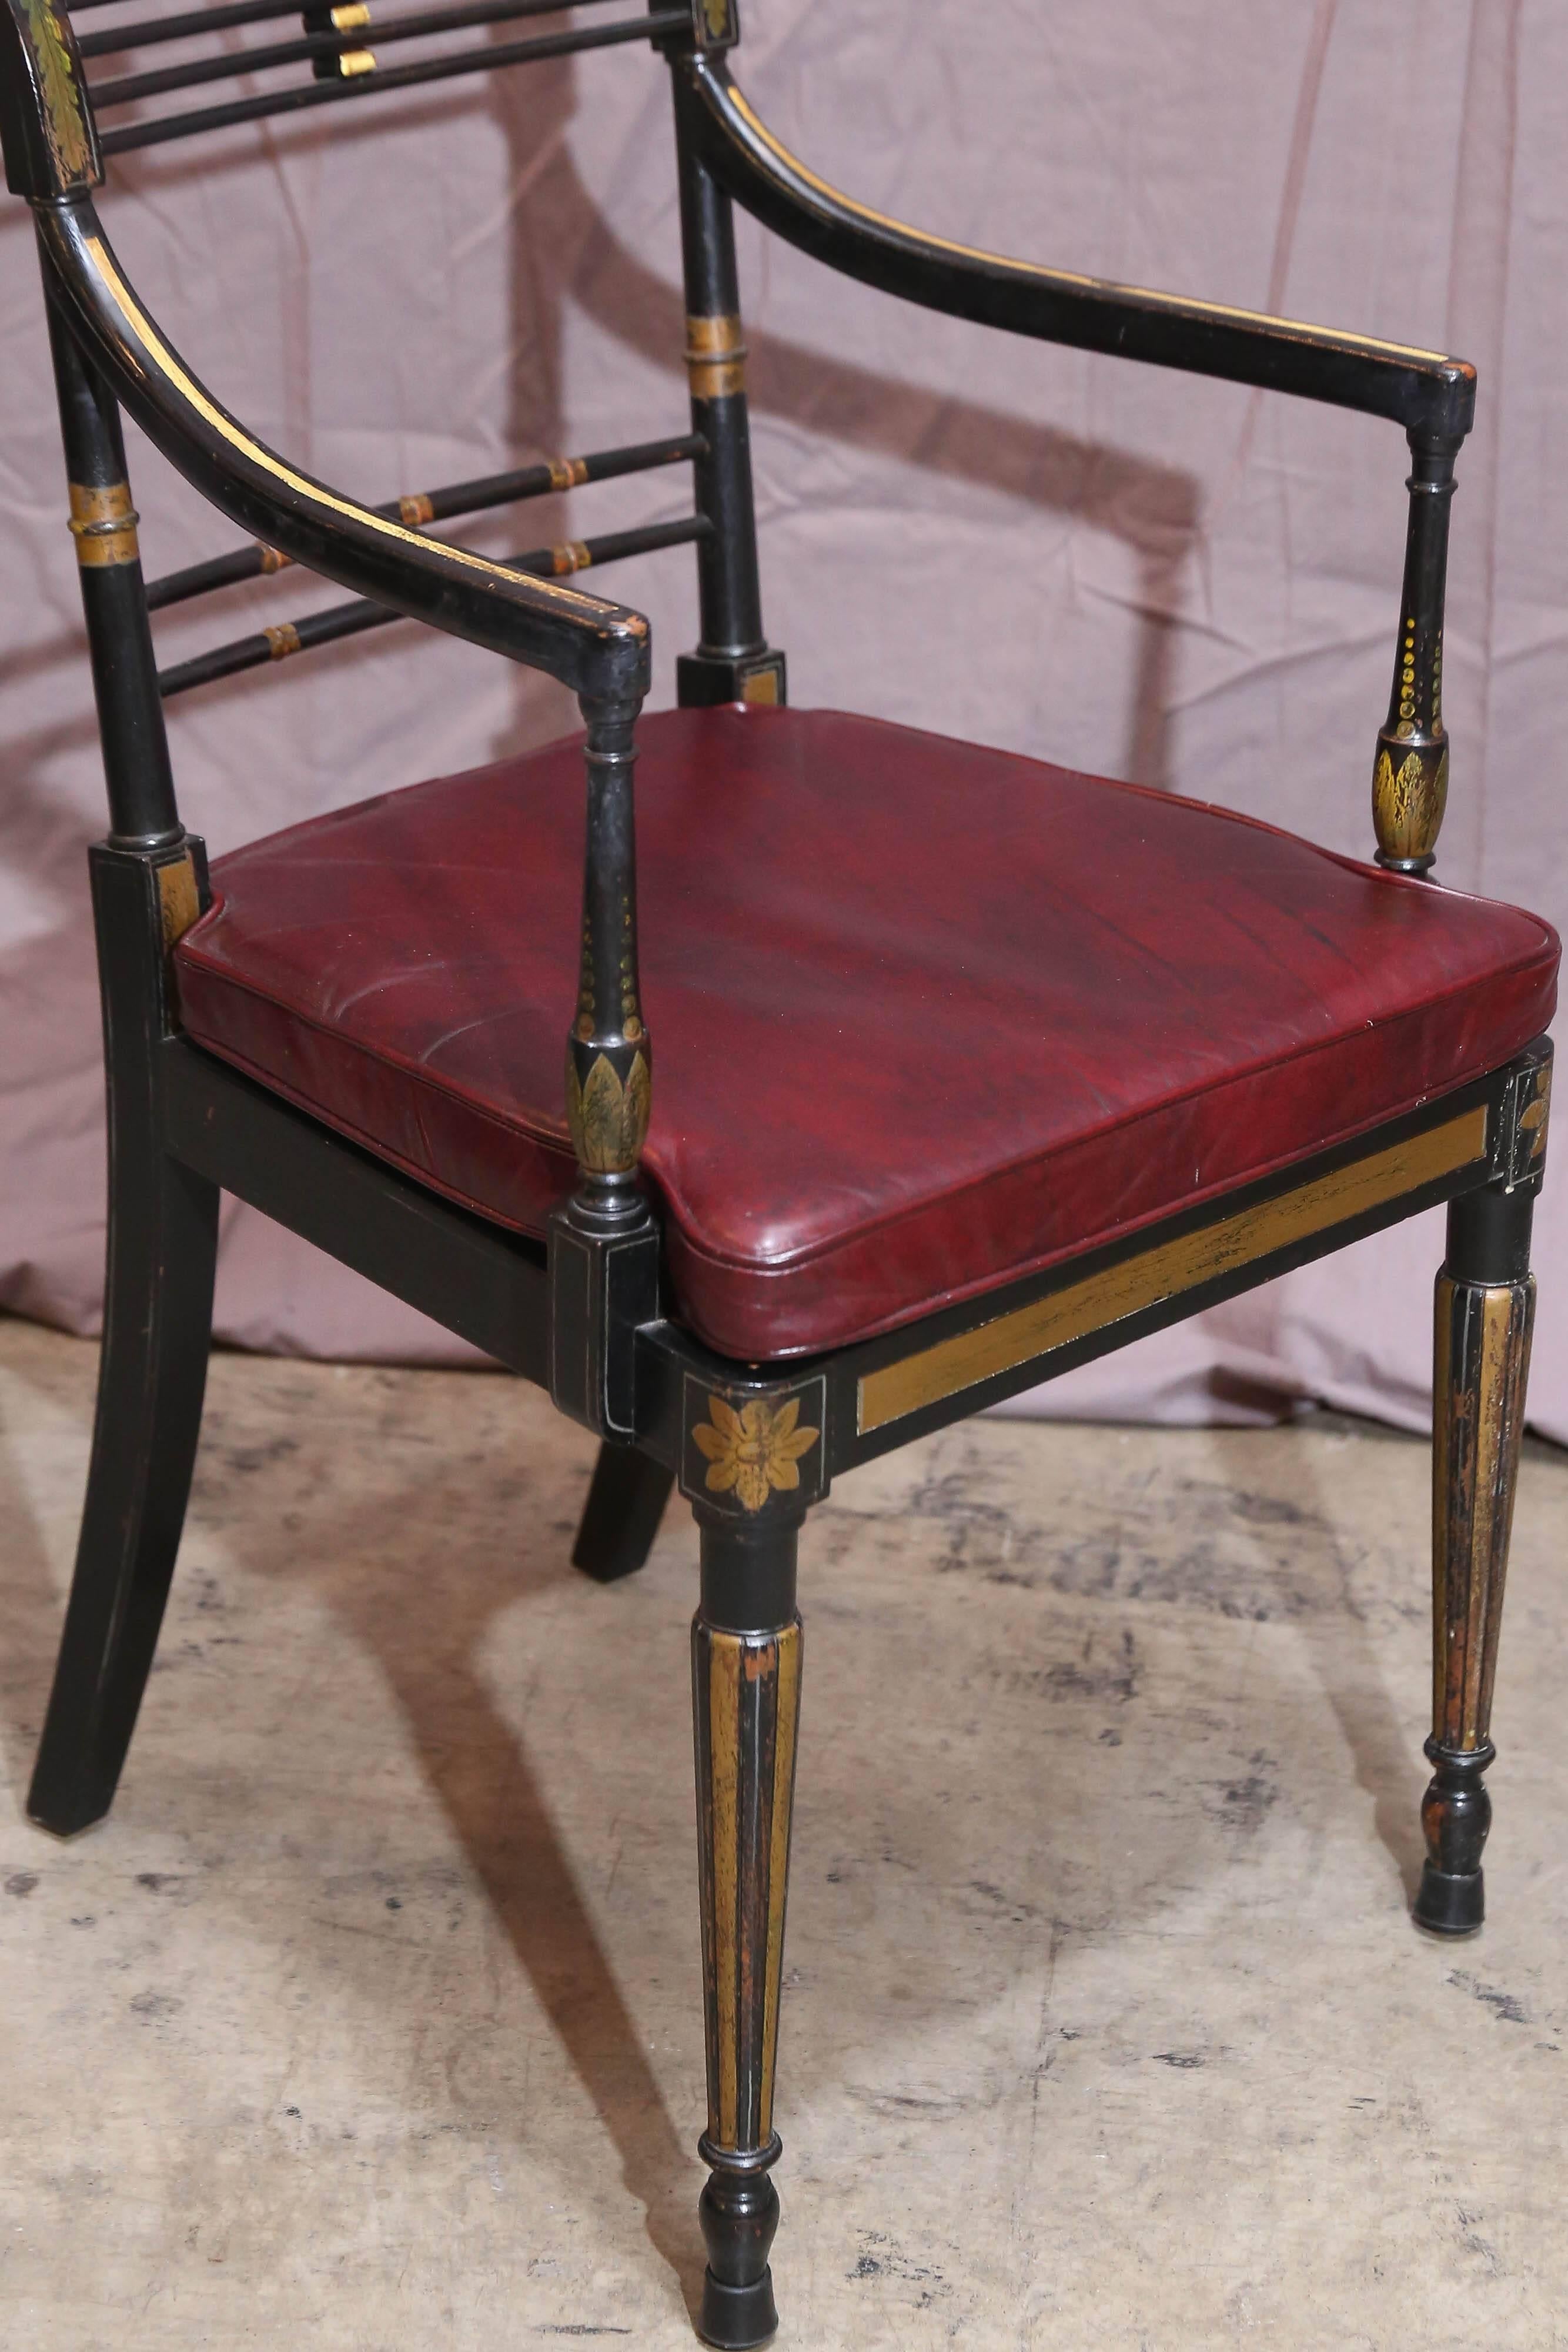 Set of black painted period English Regency armchairs are heavily stenciled in gold leaf with an acanthus leaf design. Legs are fluted and have carved detail at foot and new caned seats with leather seat pads.

front seat width 19.5